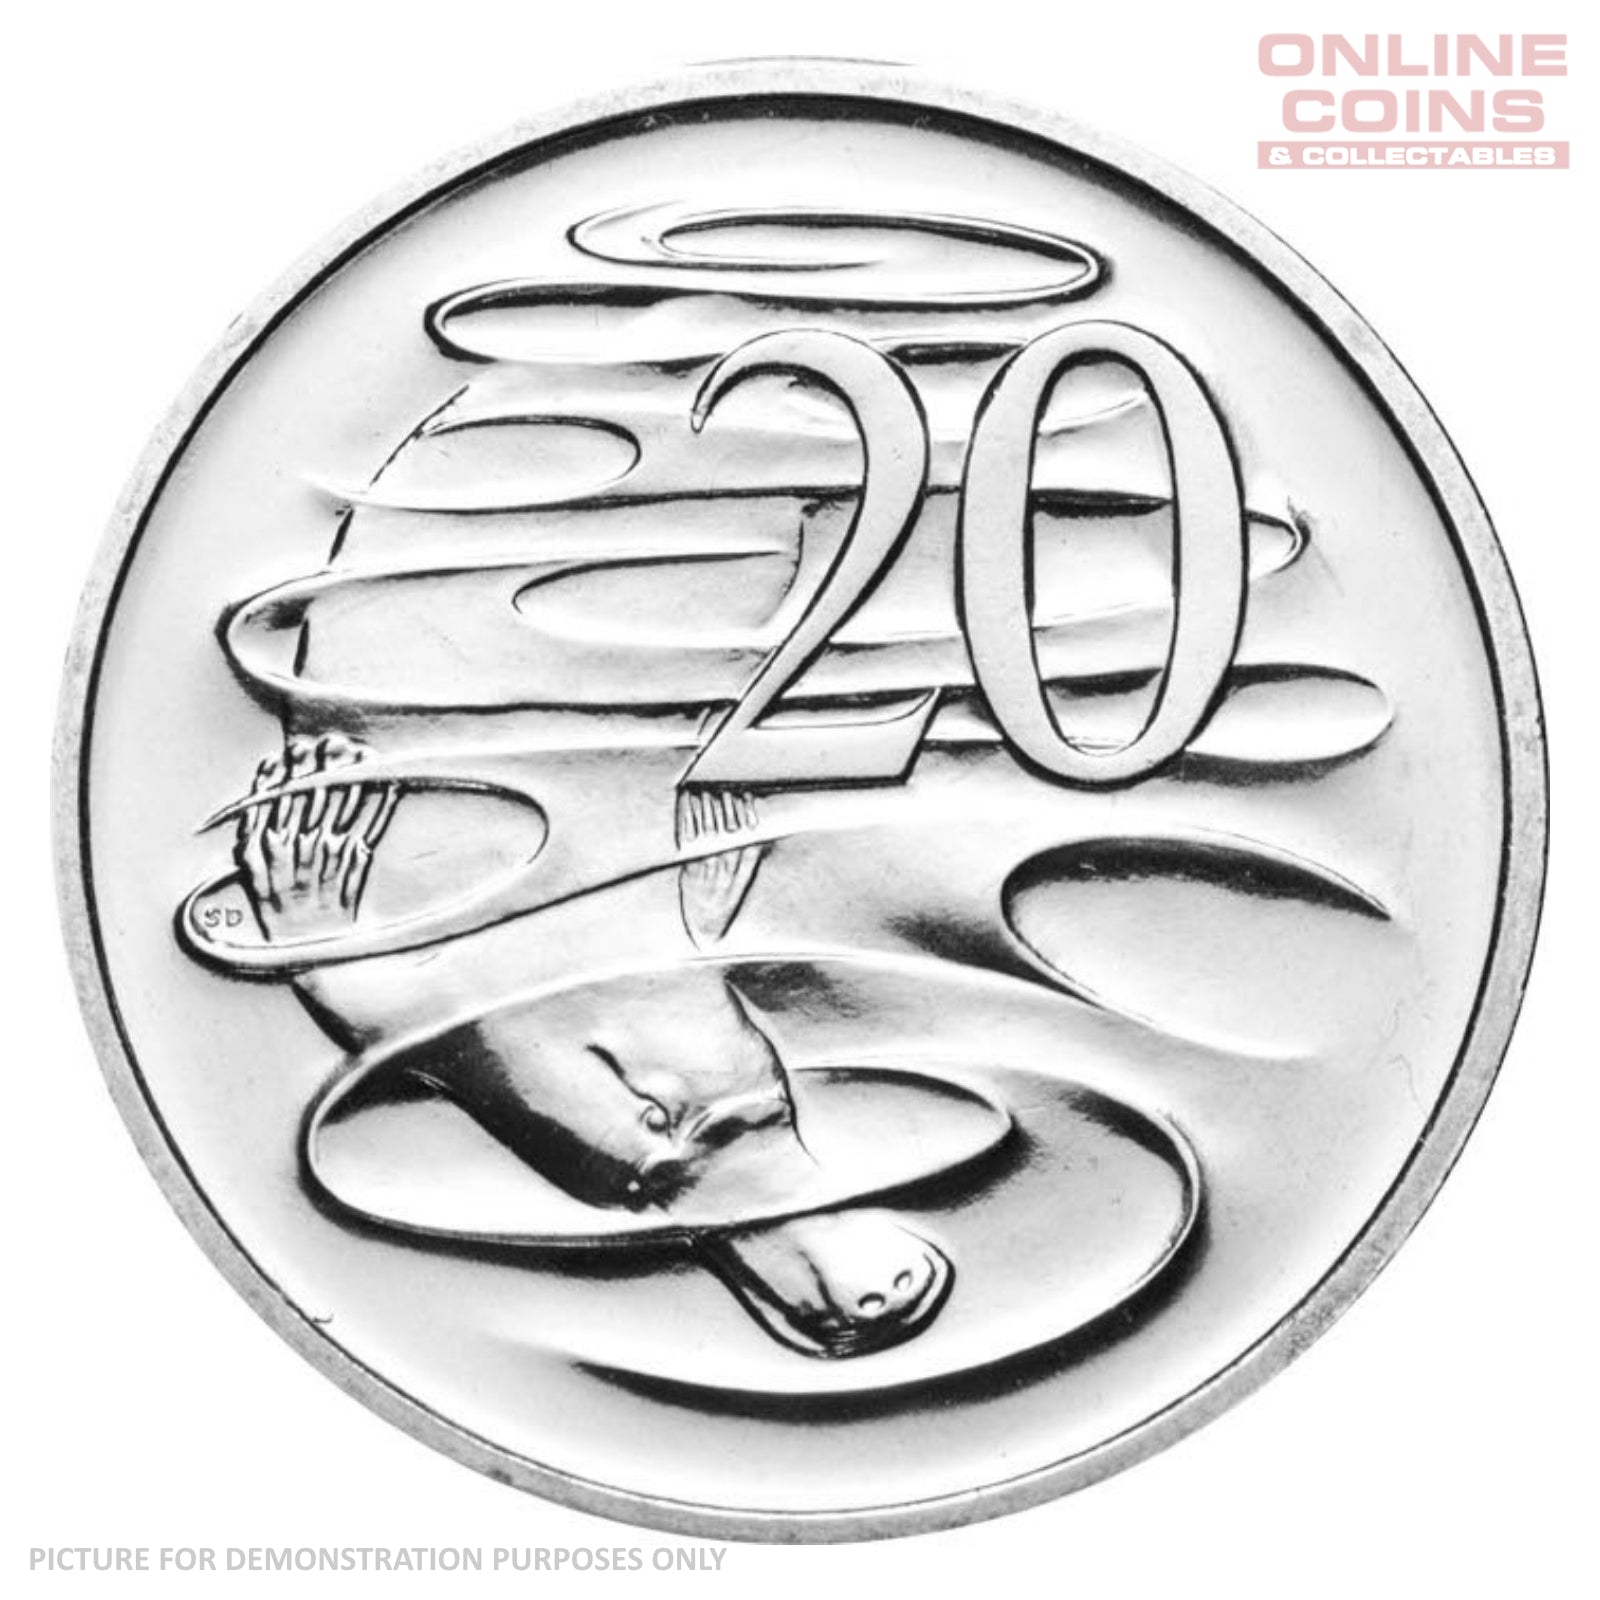 2011 Uncirculated 20c Loose Coin From Roll - Platypus